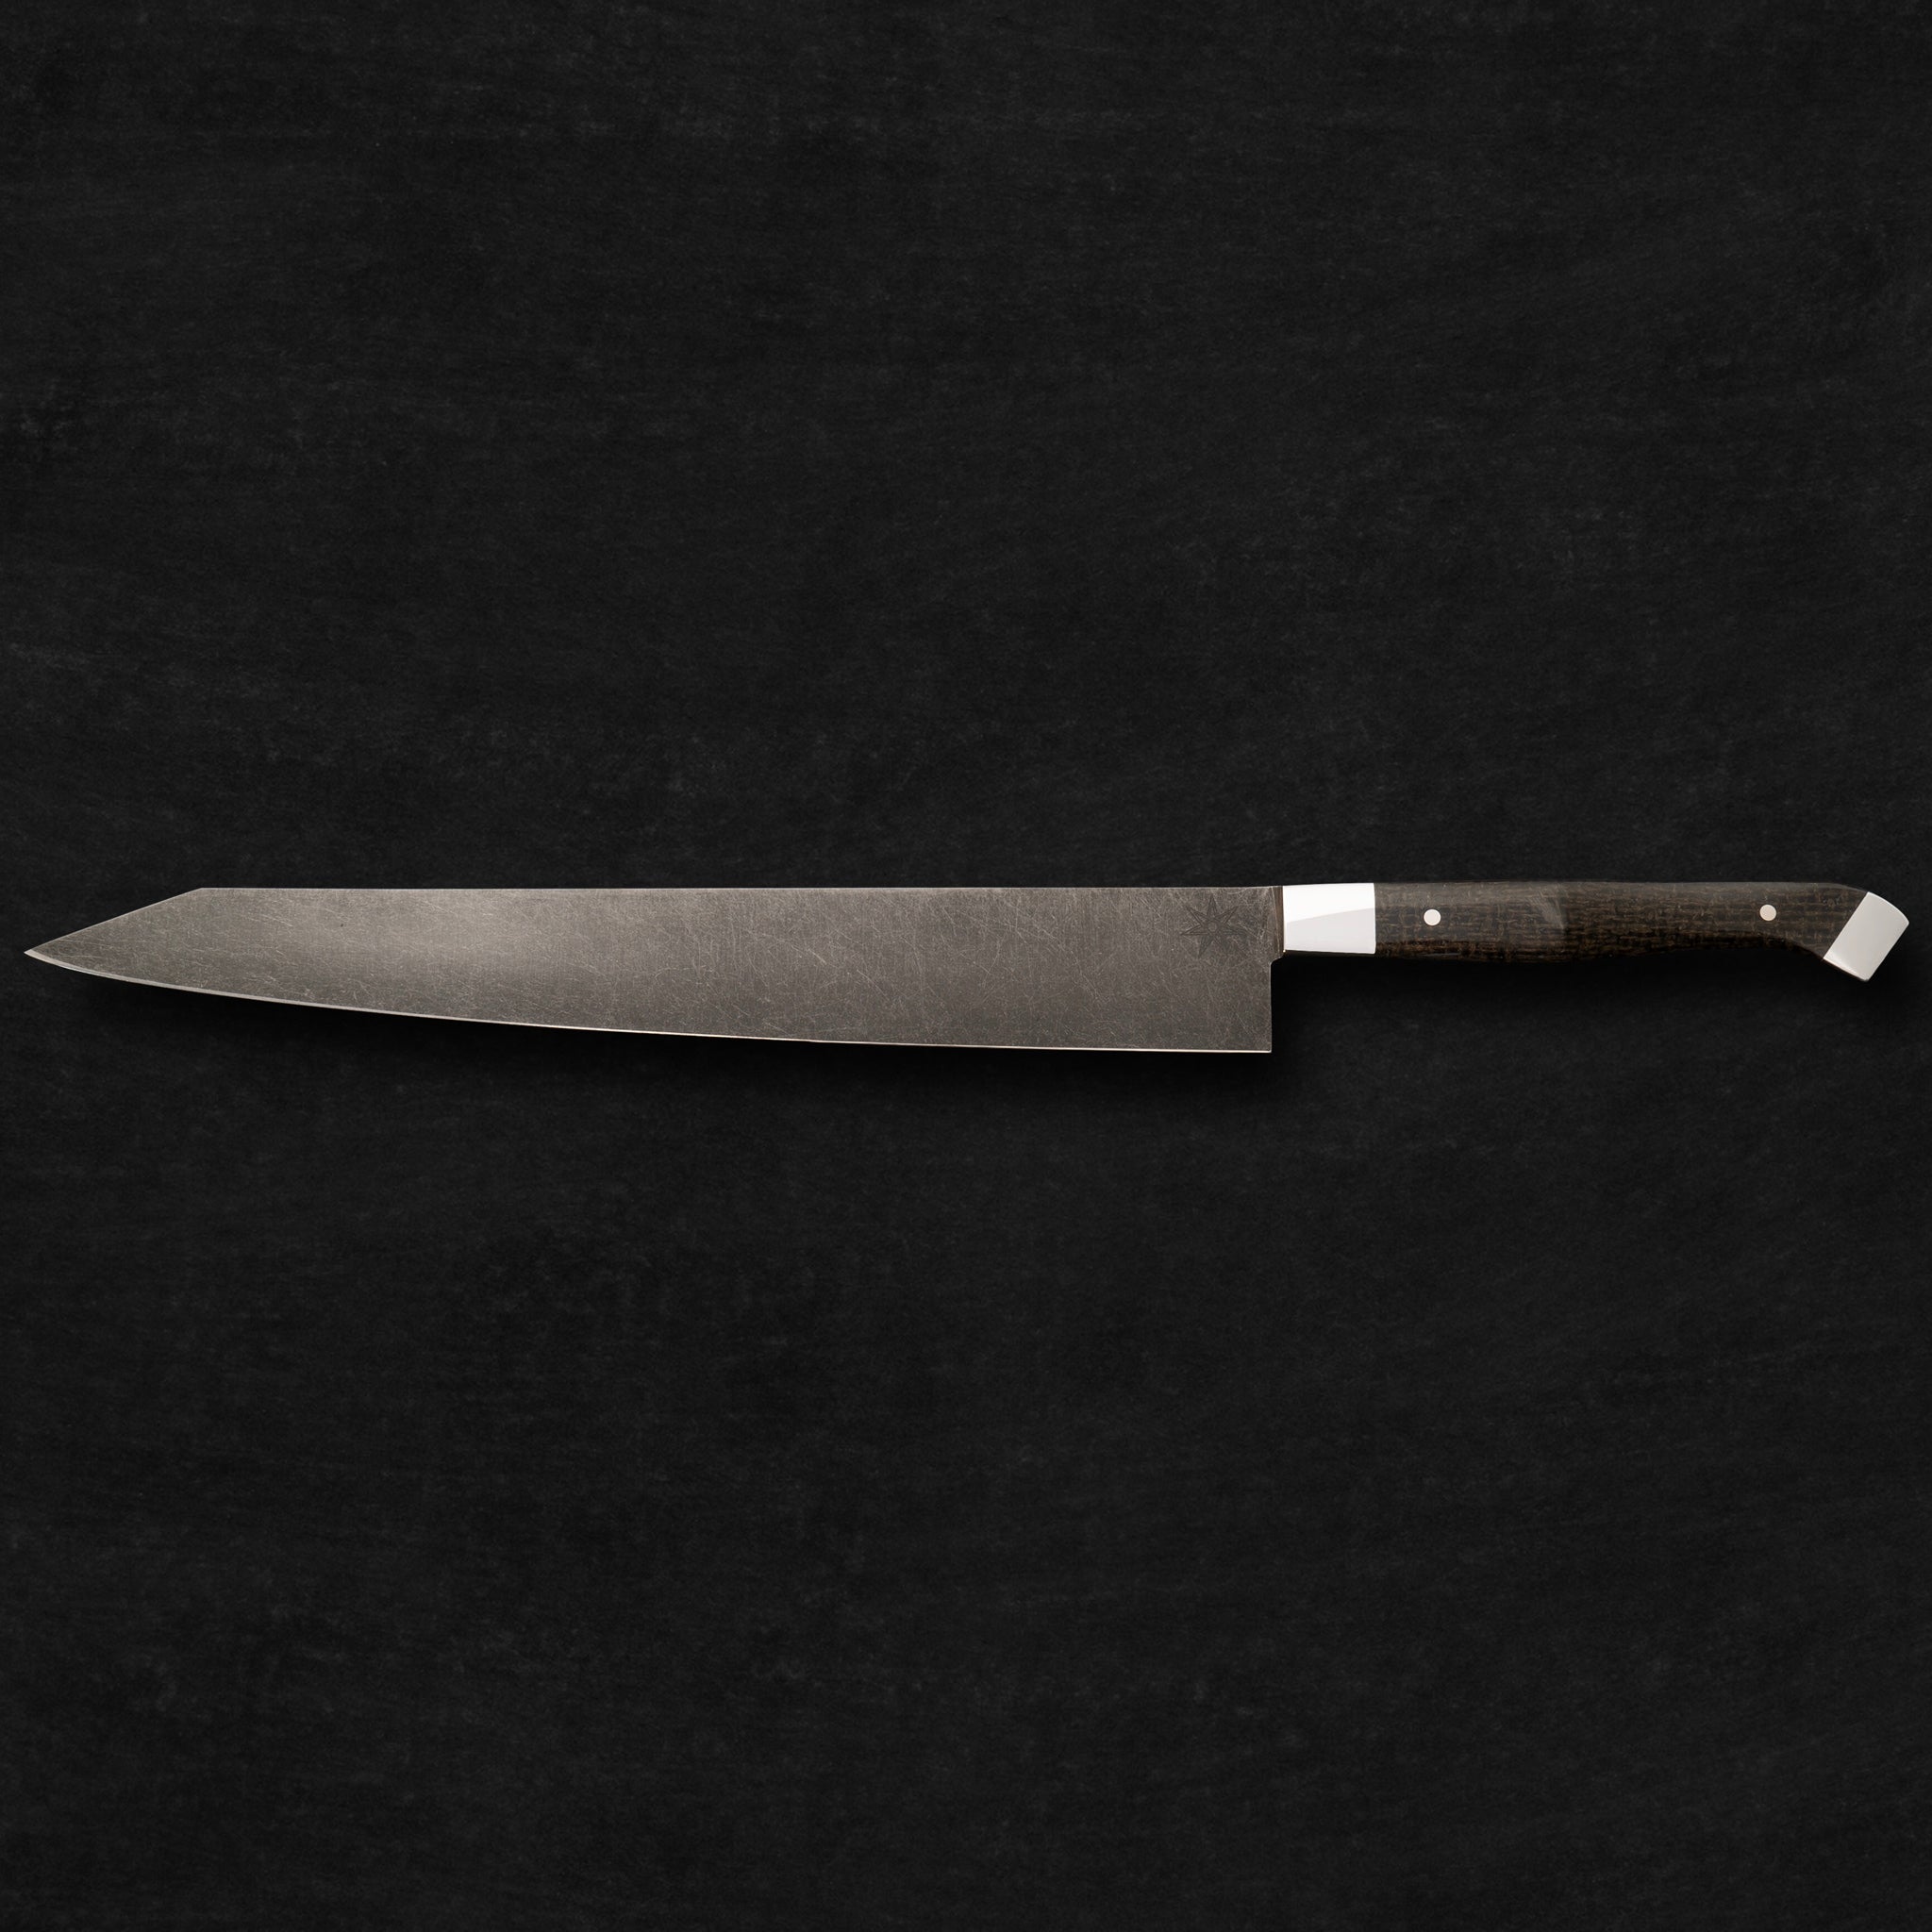 10" Carbon Steel Slicer Carving Knife with Stonewash Finish Blade, Black Burlap Micarta Handle, Stainless Steel Bolster and Pommel by Town Cutler